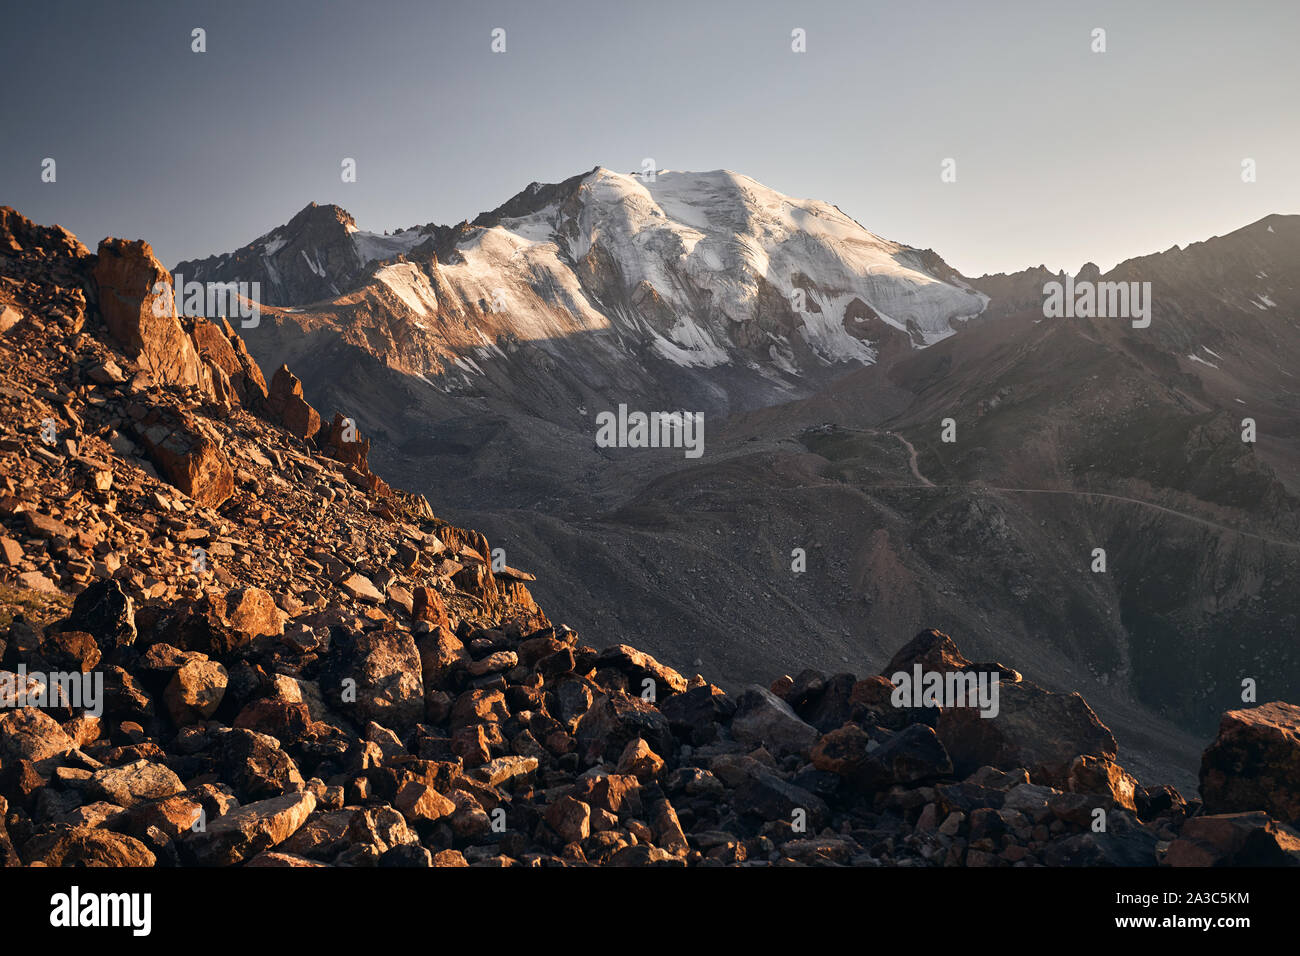 Landscape of Molodejniy peak in Tian Shan Mountains at sunset in Kazakhstan Stock Photo